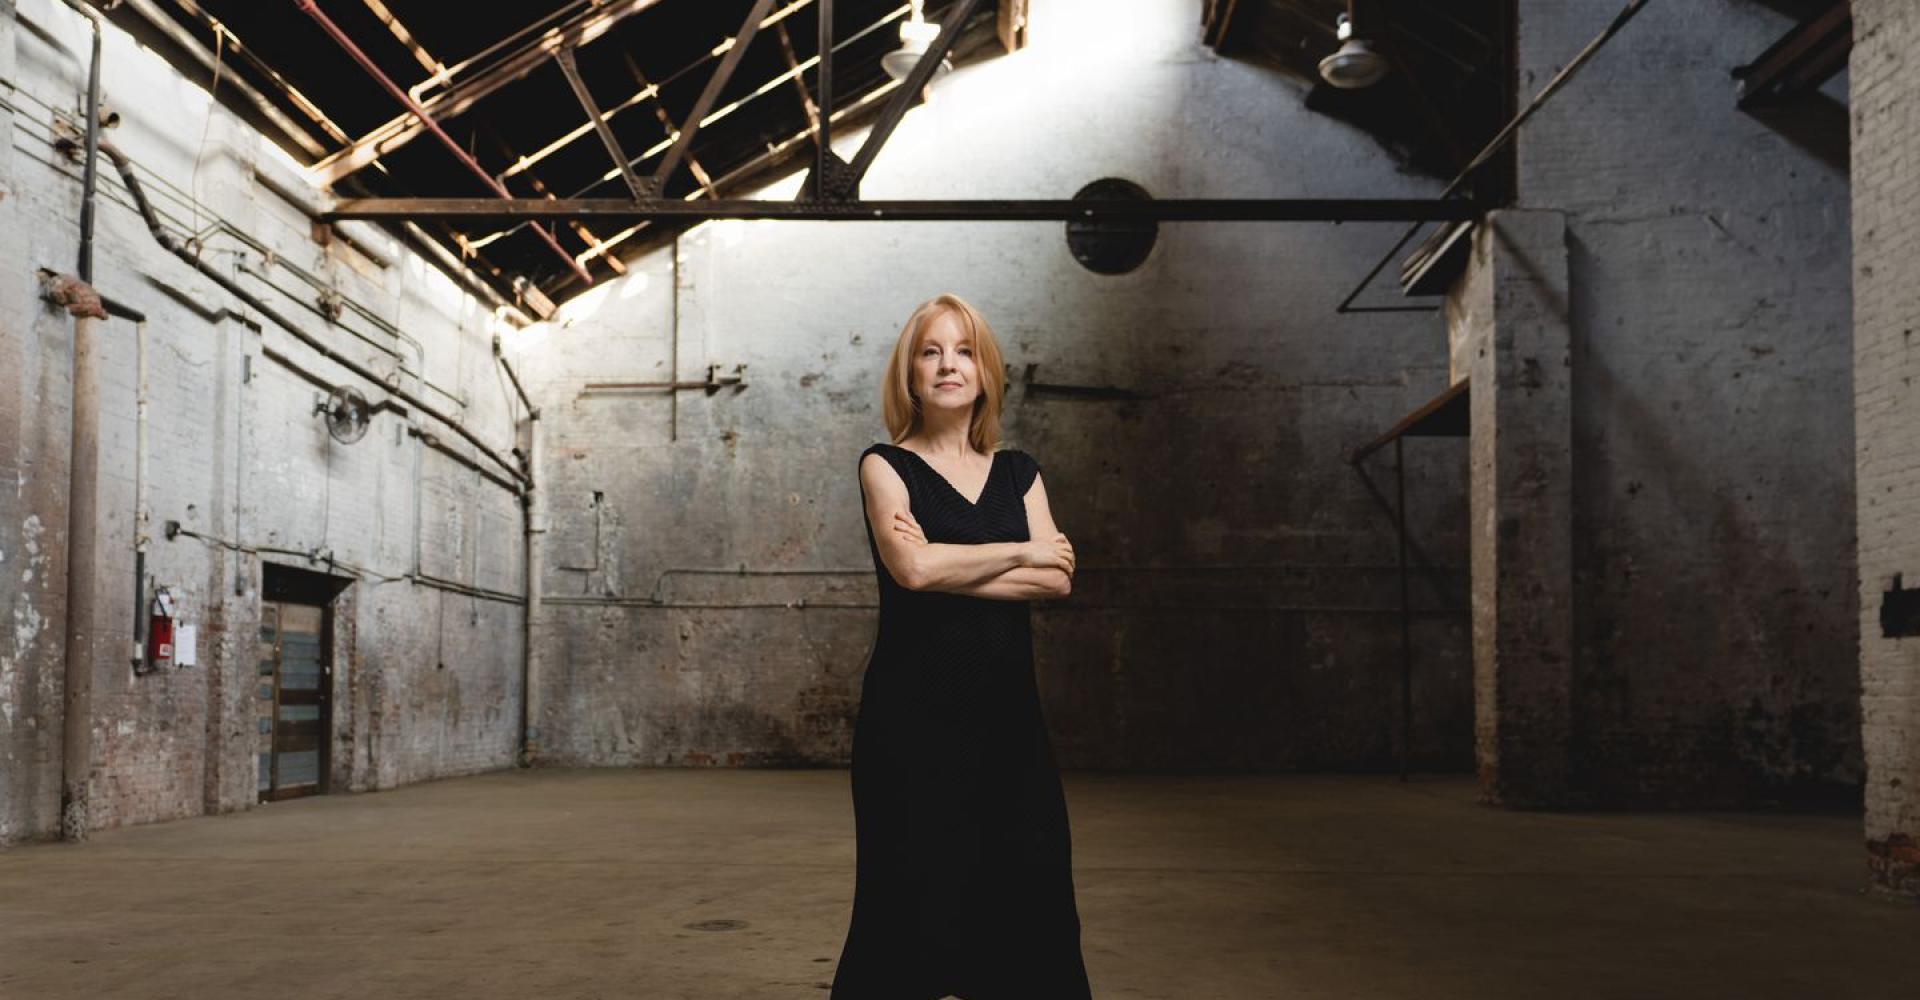 Maria Schneider stands in a warehouse or barn, looking at the camera with arms crossed.